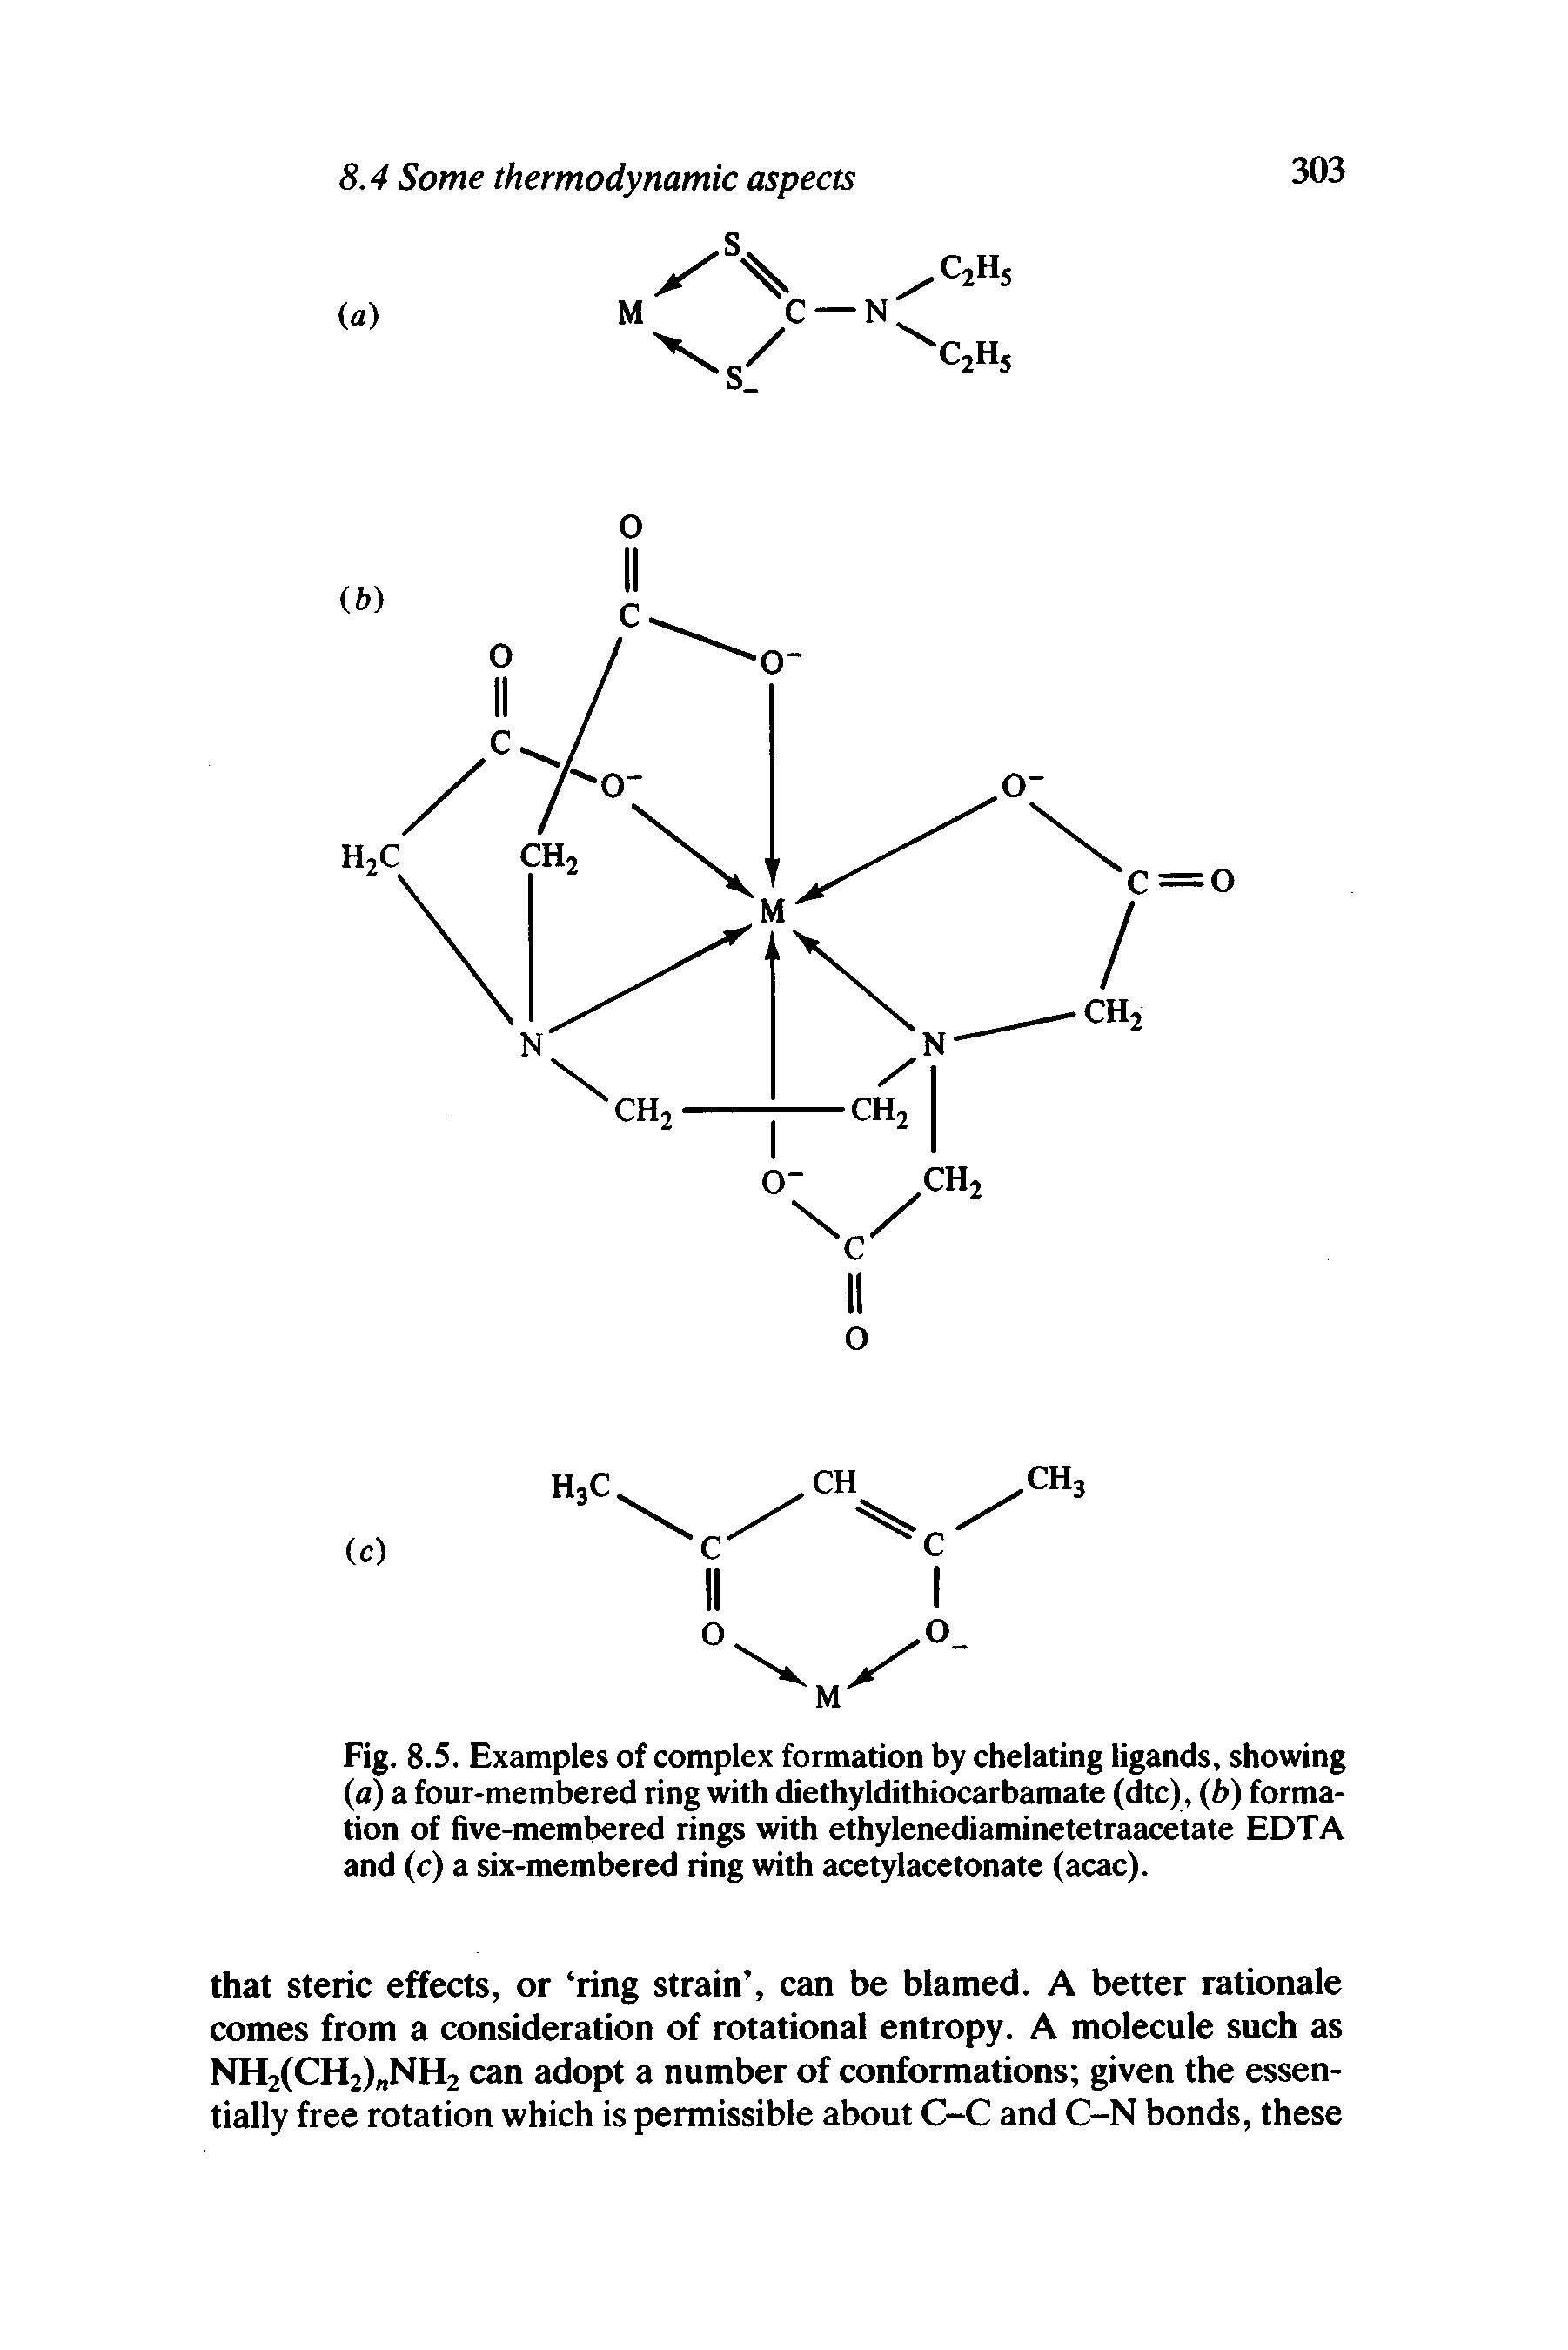 Fig. 8.5. Examples of complex formation by chelating ligands, showing (a) a four-membered ring with diethyldithiocarbamate (dtc), (b) formation of five-membered rings with ethylenediaminetetraacetate EDTA and (c) a six-membered ring with acetylacetonate (acac).